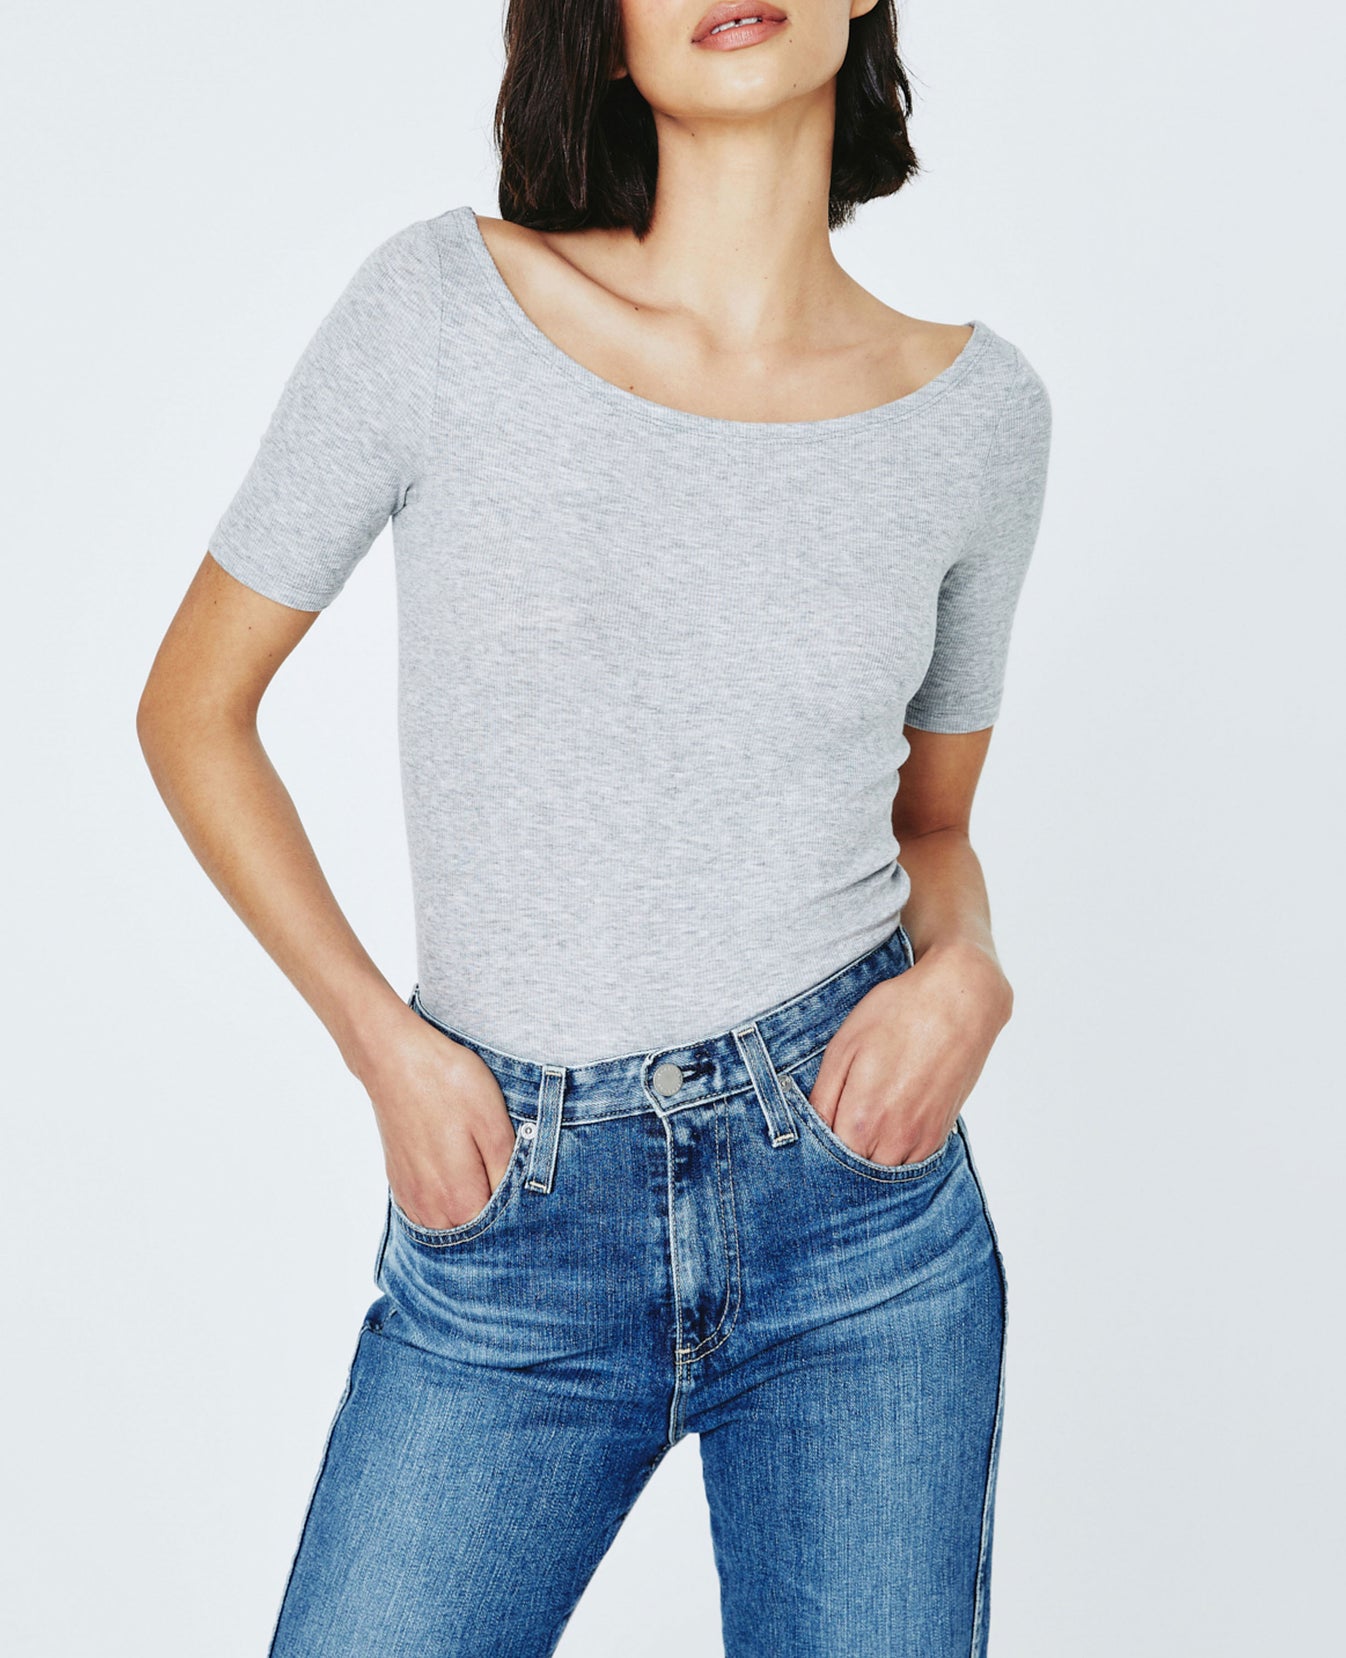 Didion Ballet Neck Tee Heather Grey Ribbed Knit Collection Women Tops Photo 1